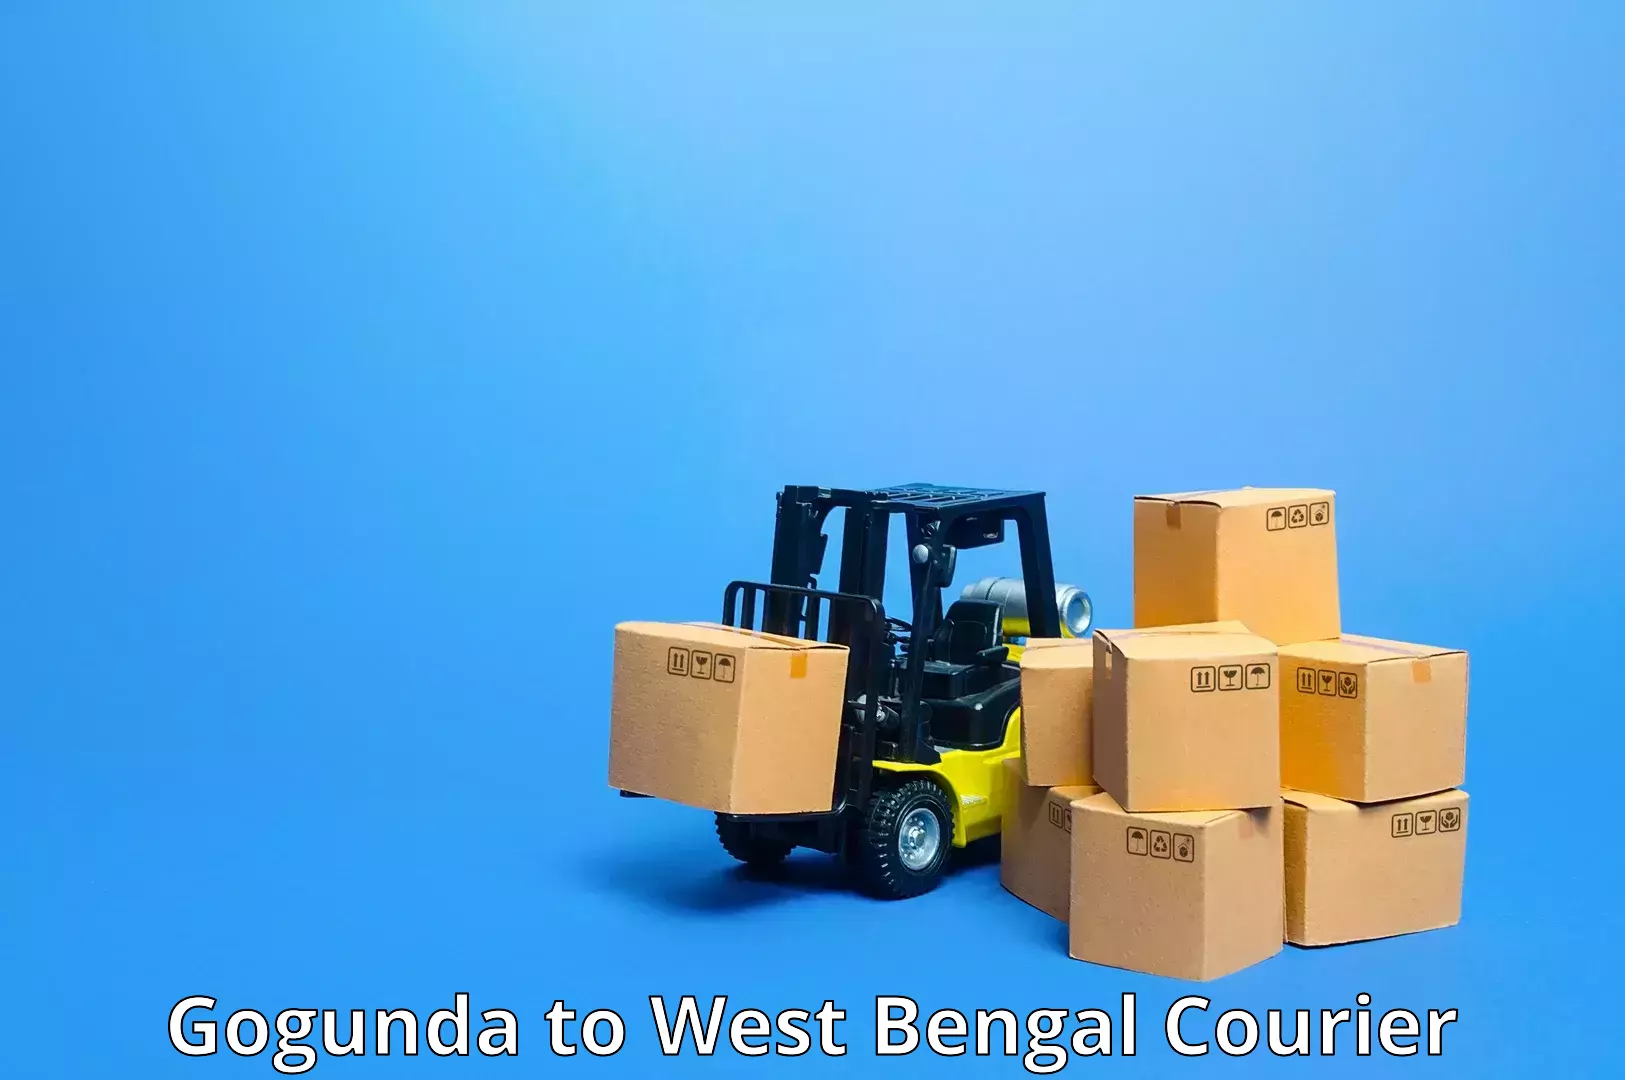 Local delivery service Gogunda to West Bengal